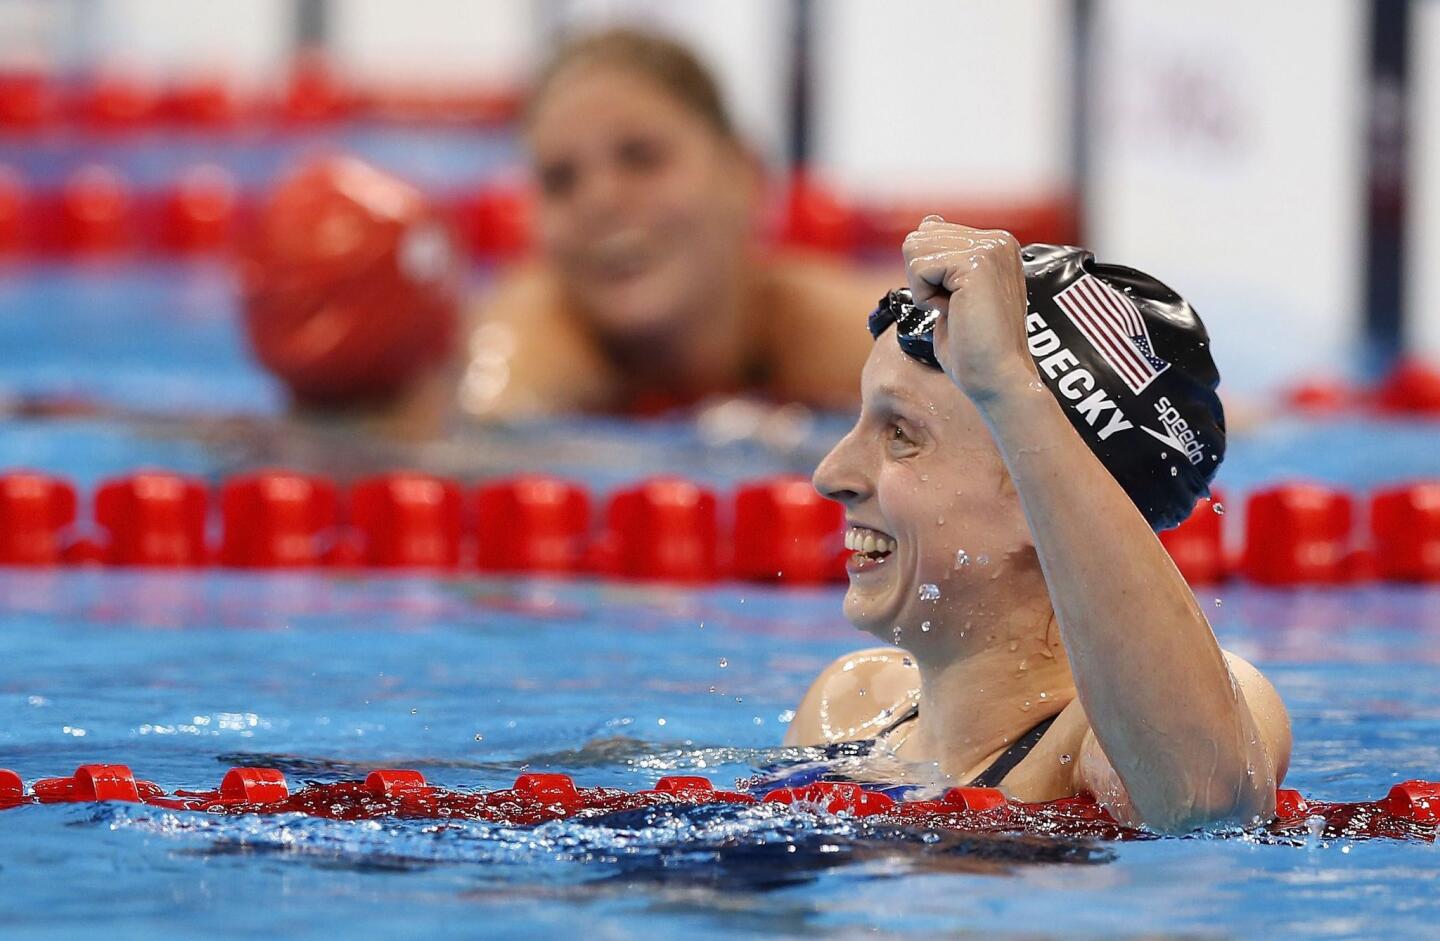 Katie Ledecky of USA celebrates after winning in the women's 800m Freestyle Final race of the Rio 2016 Olympic Games Swimming events at Olympic Aquatics Stadium at the Olympic Park in Rio de Janeiro, Brazil.